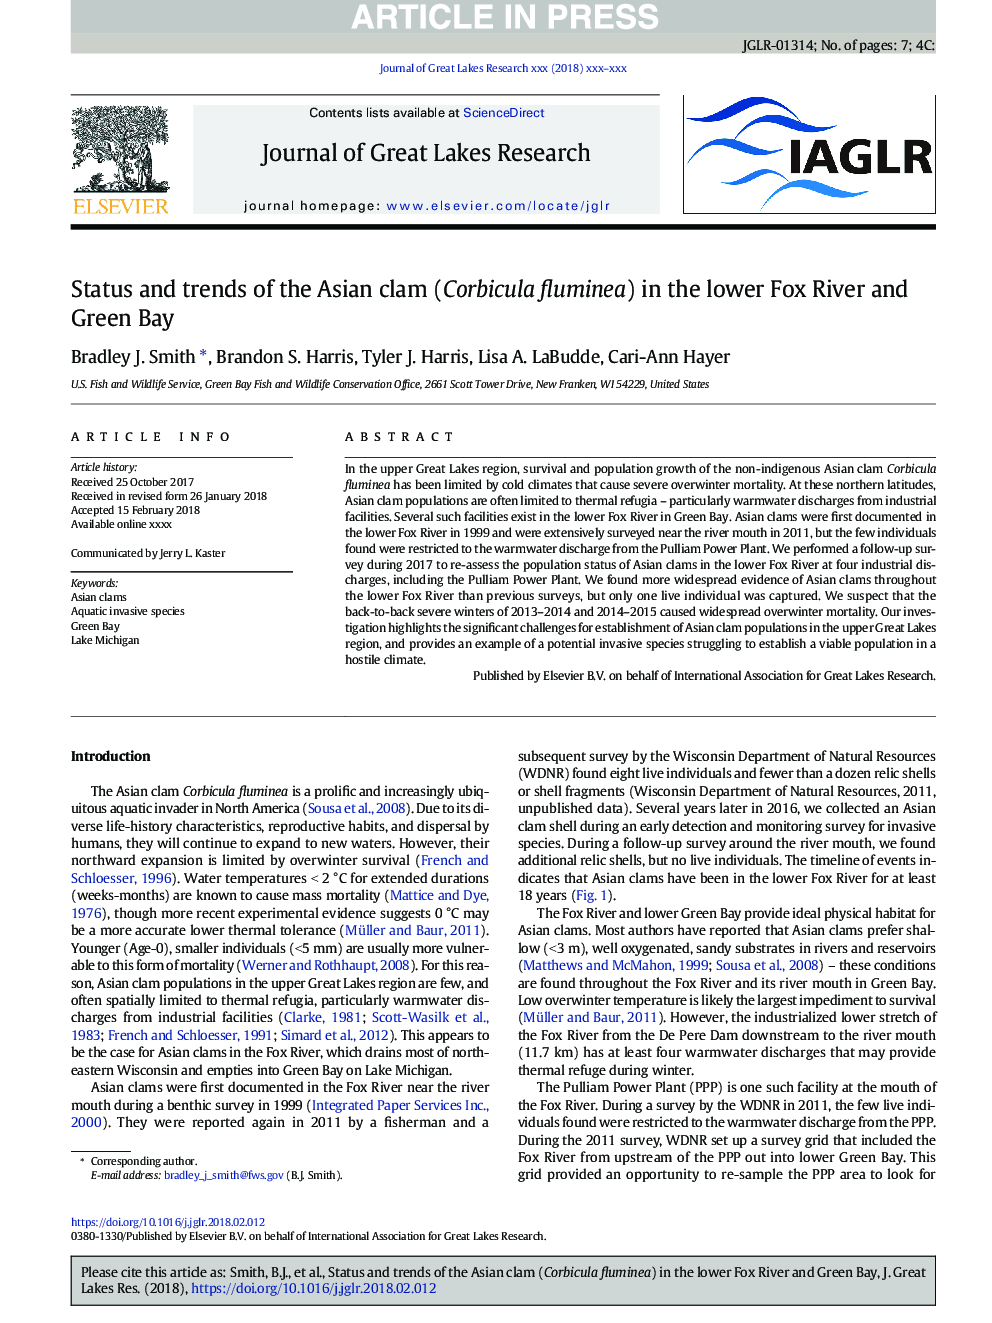 Status and trends of the Asian clam (Corbicula fluminea) in the lower Fox River and Green Bay